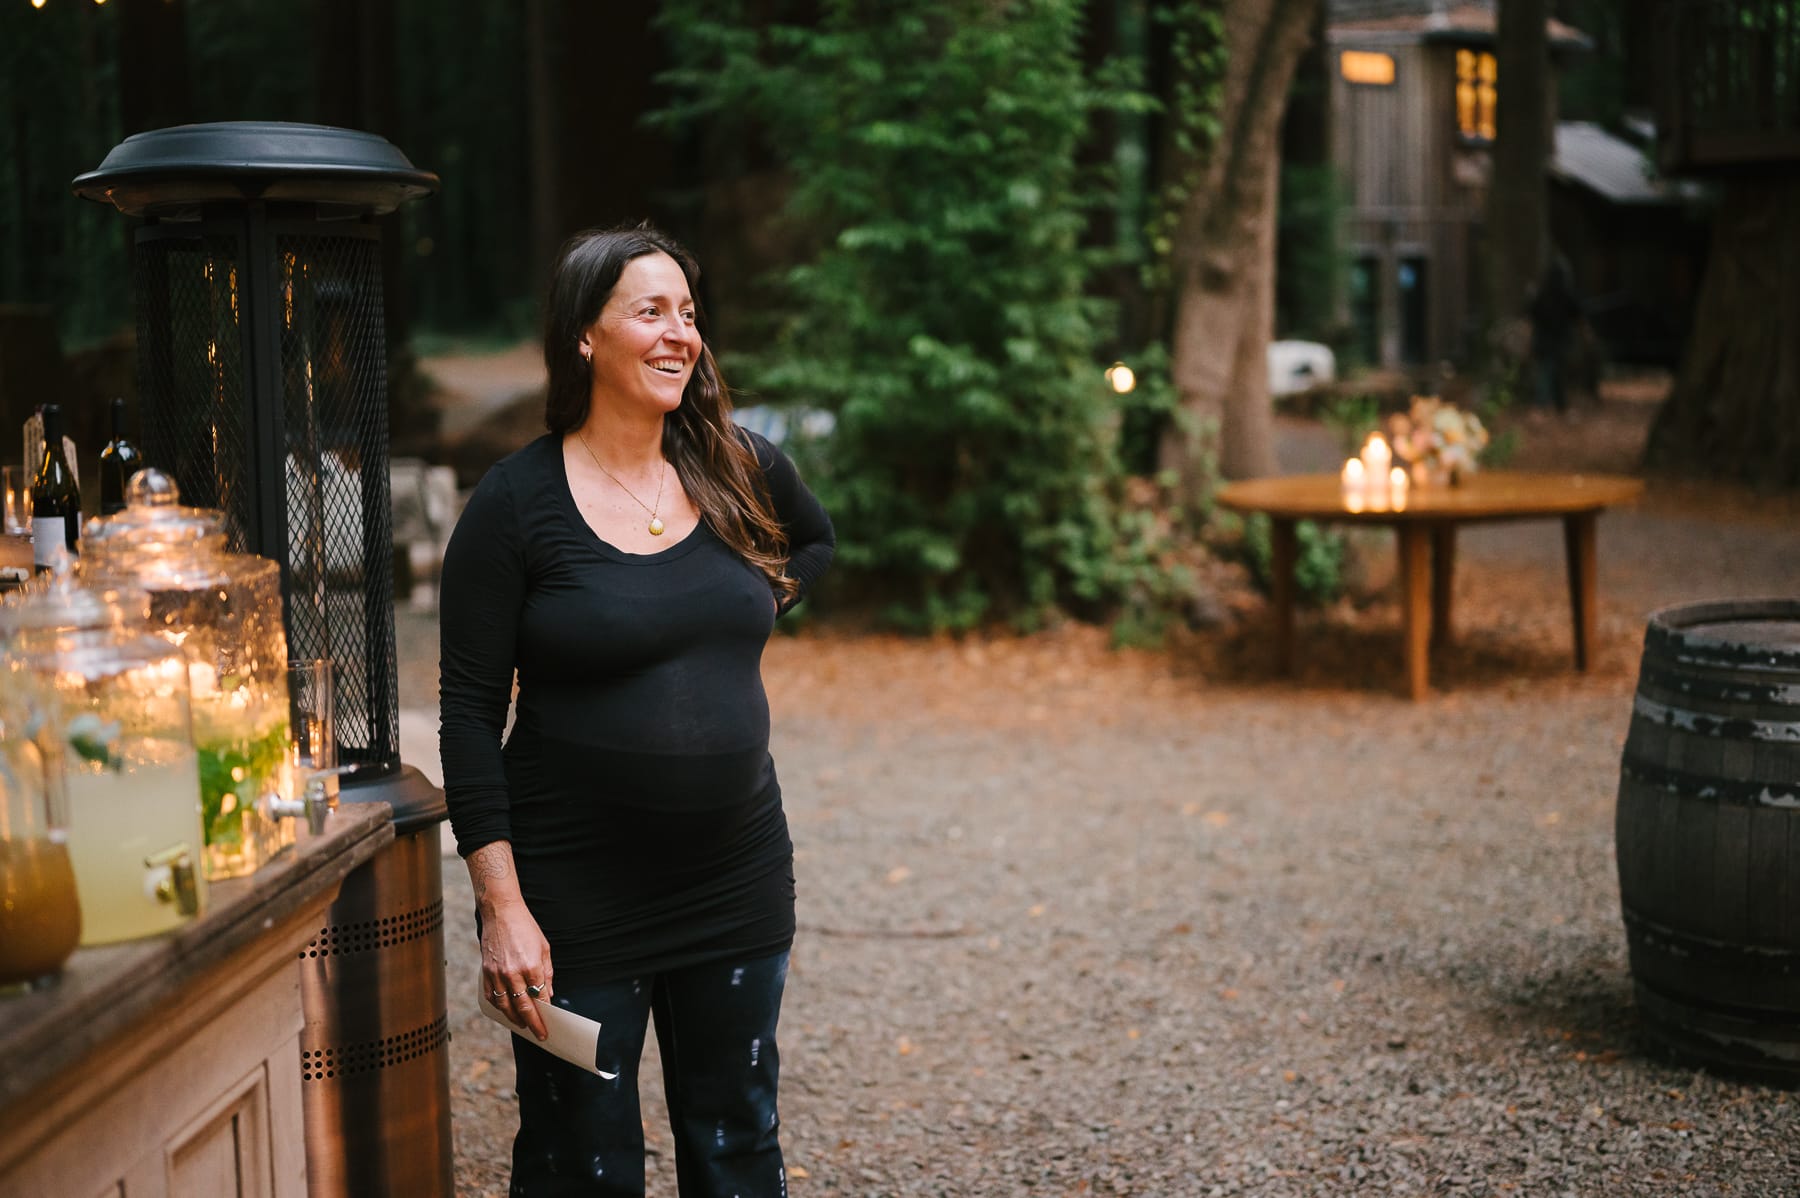 Pregnant event planner, Madeline Hurst, standing near redwoods and portable bar at wedding at the Brambles in Mendocino.